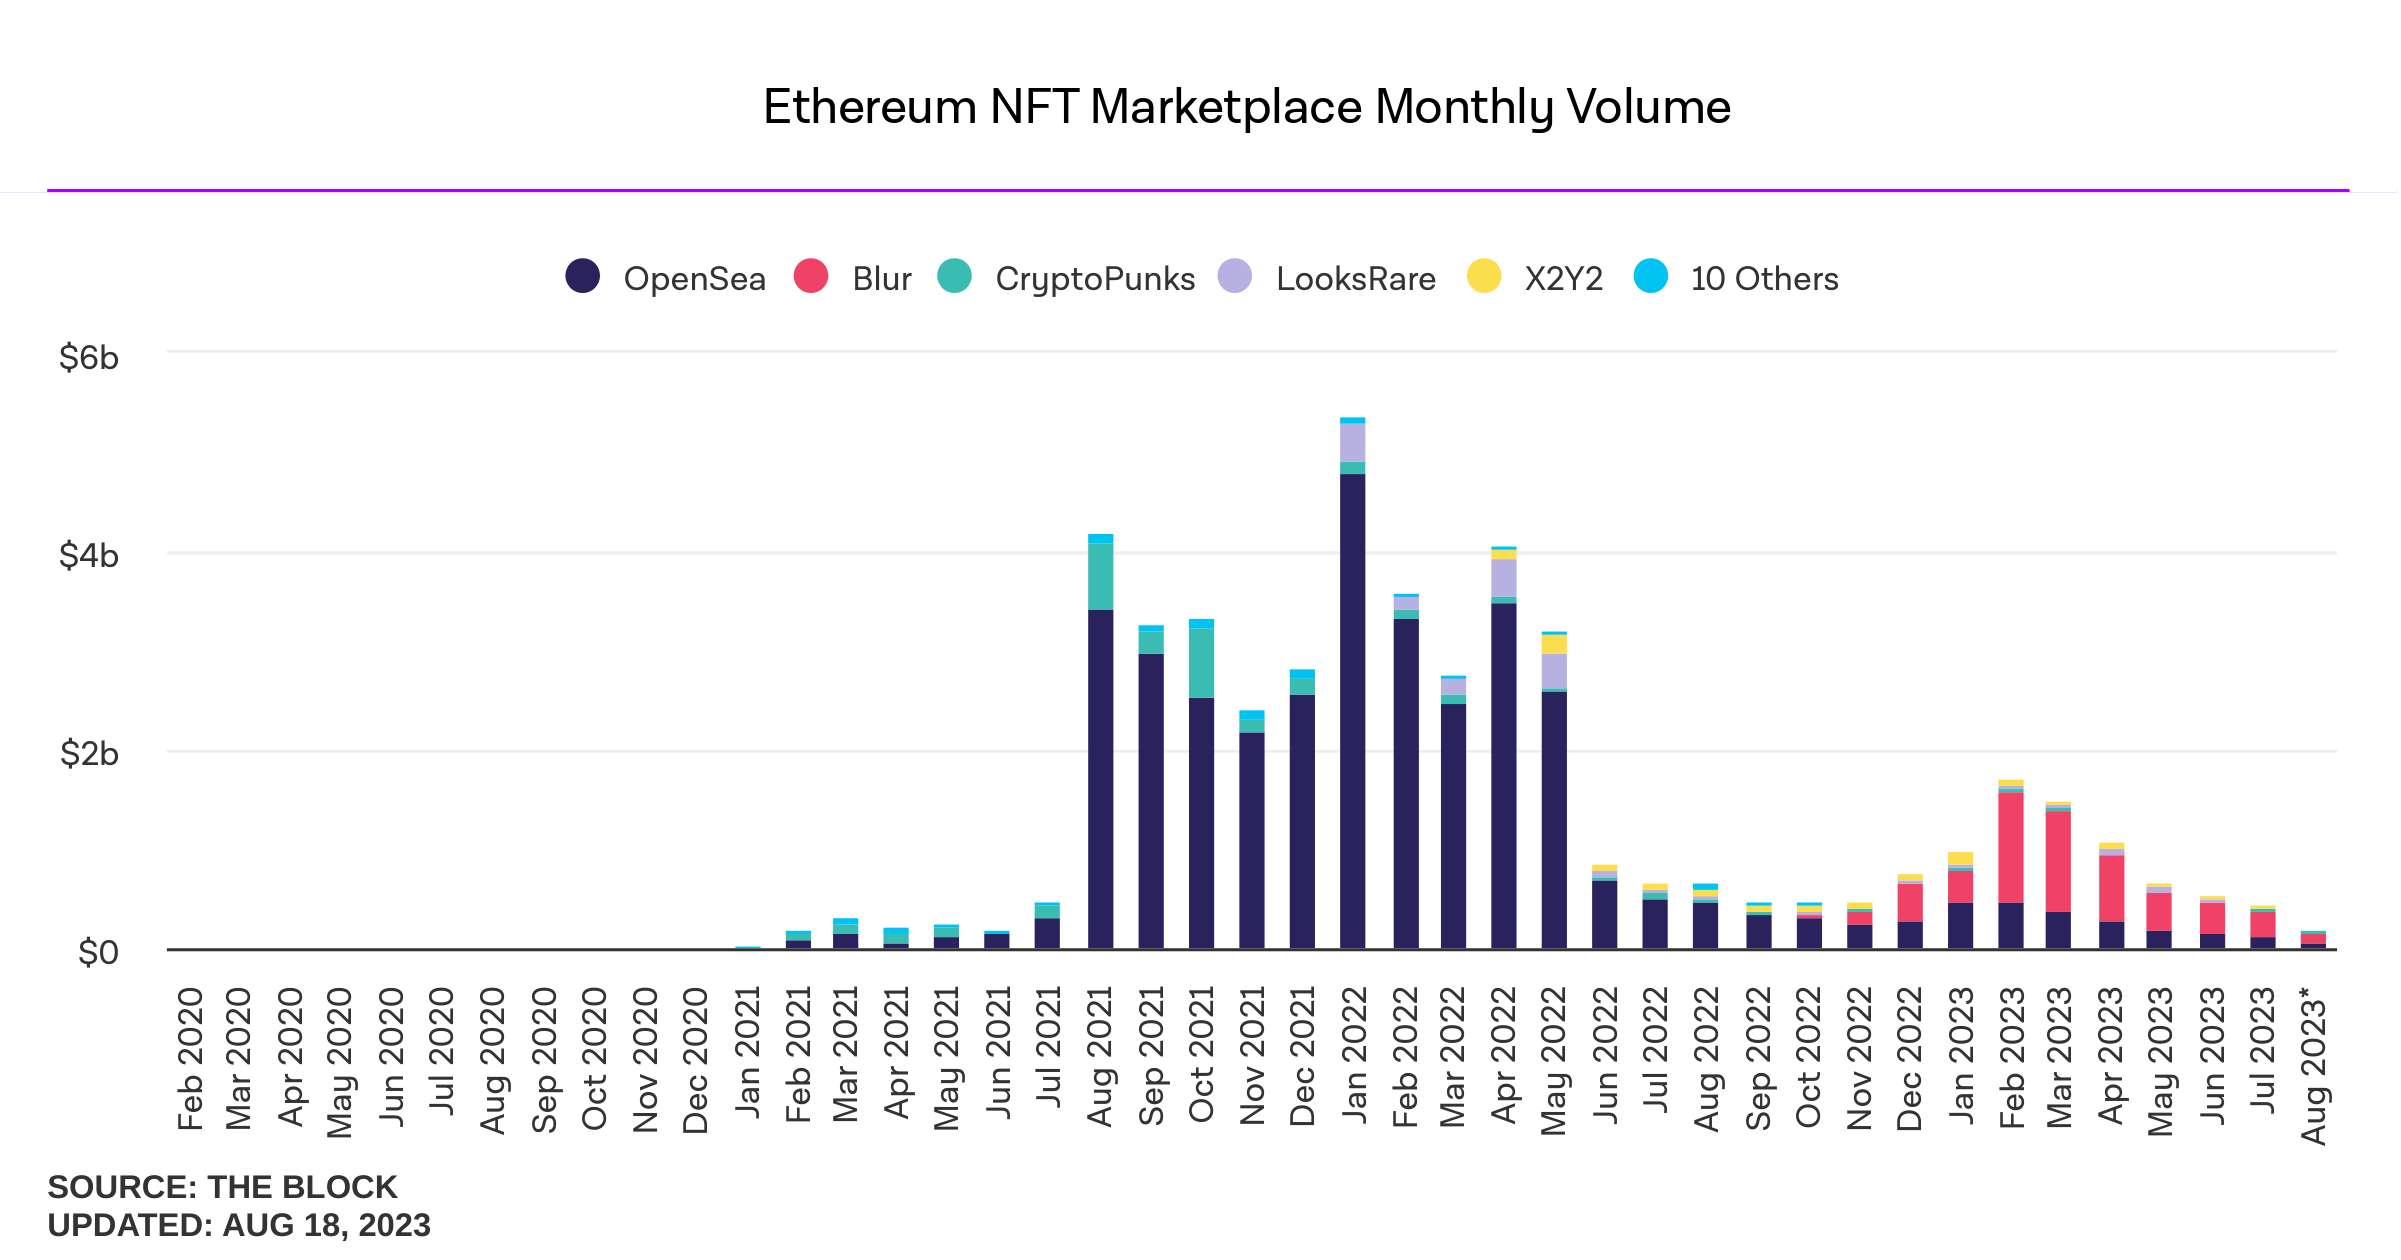 Ethereum NFT marketplace monthly volume, showing dominance by OpenSea up until around December 2022, when Blur began to make up a substantial portion of the market share.